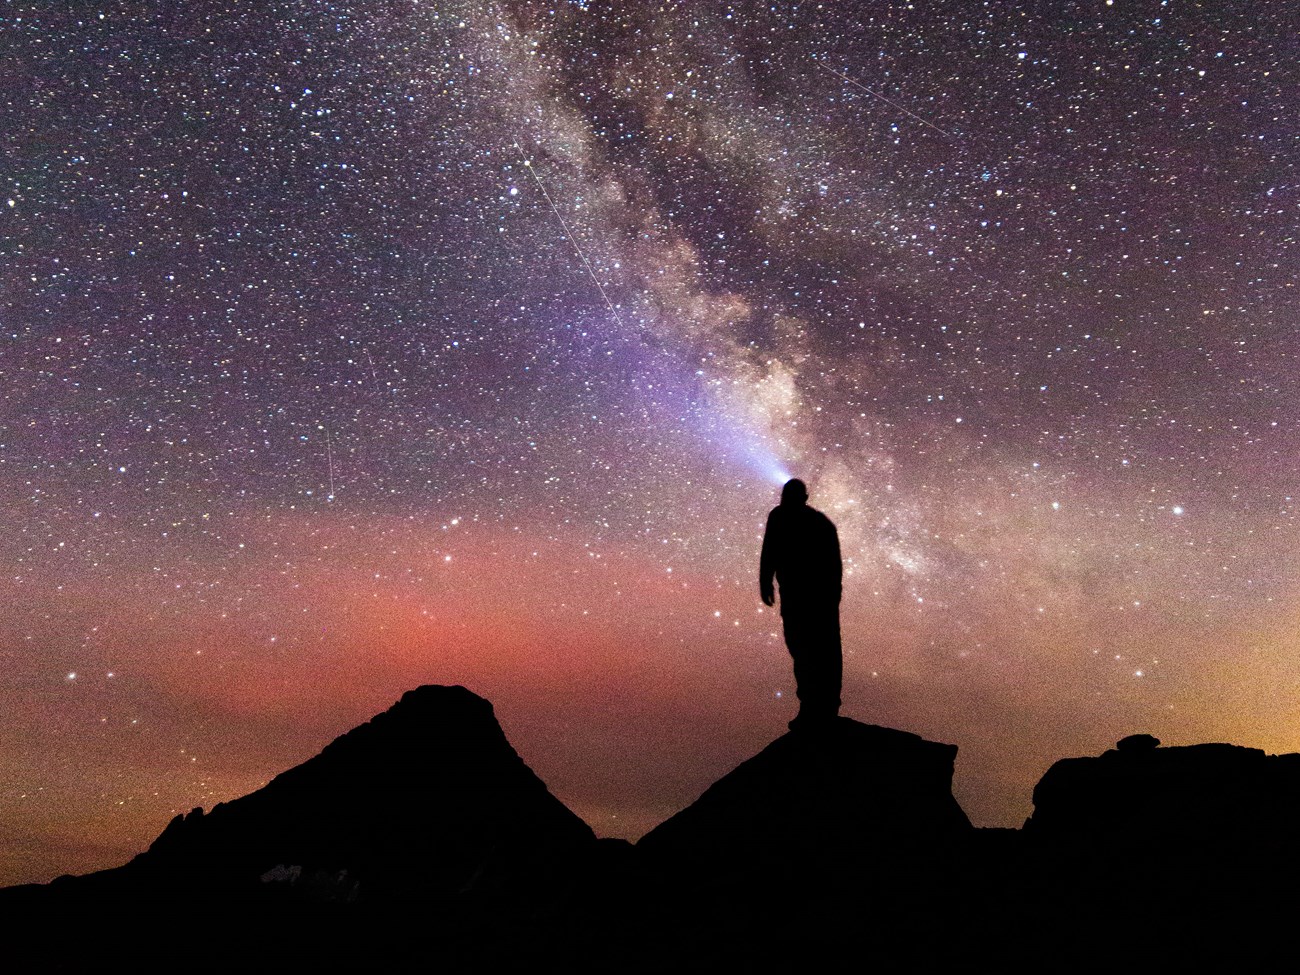 A hiker standing on rocks is silhouetted in black while looking up at the Milky Way at night